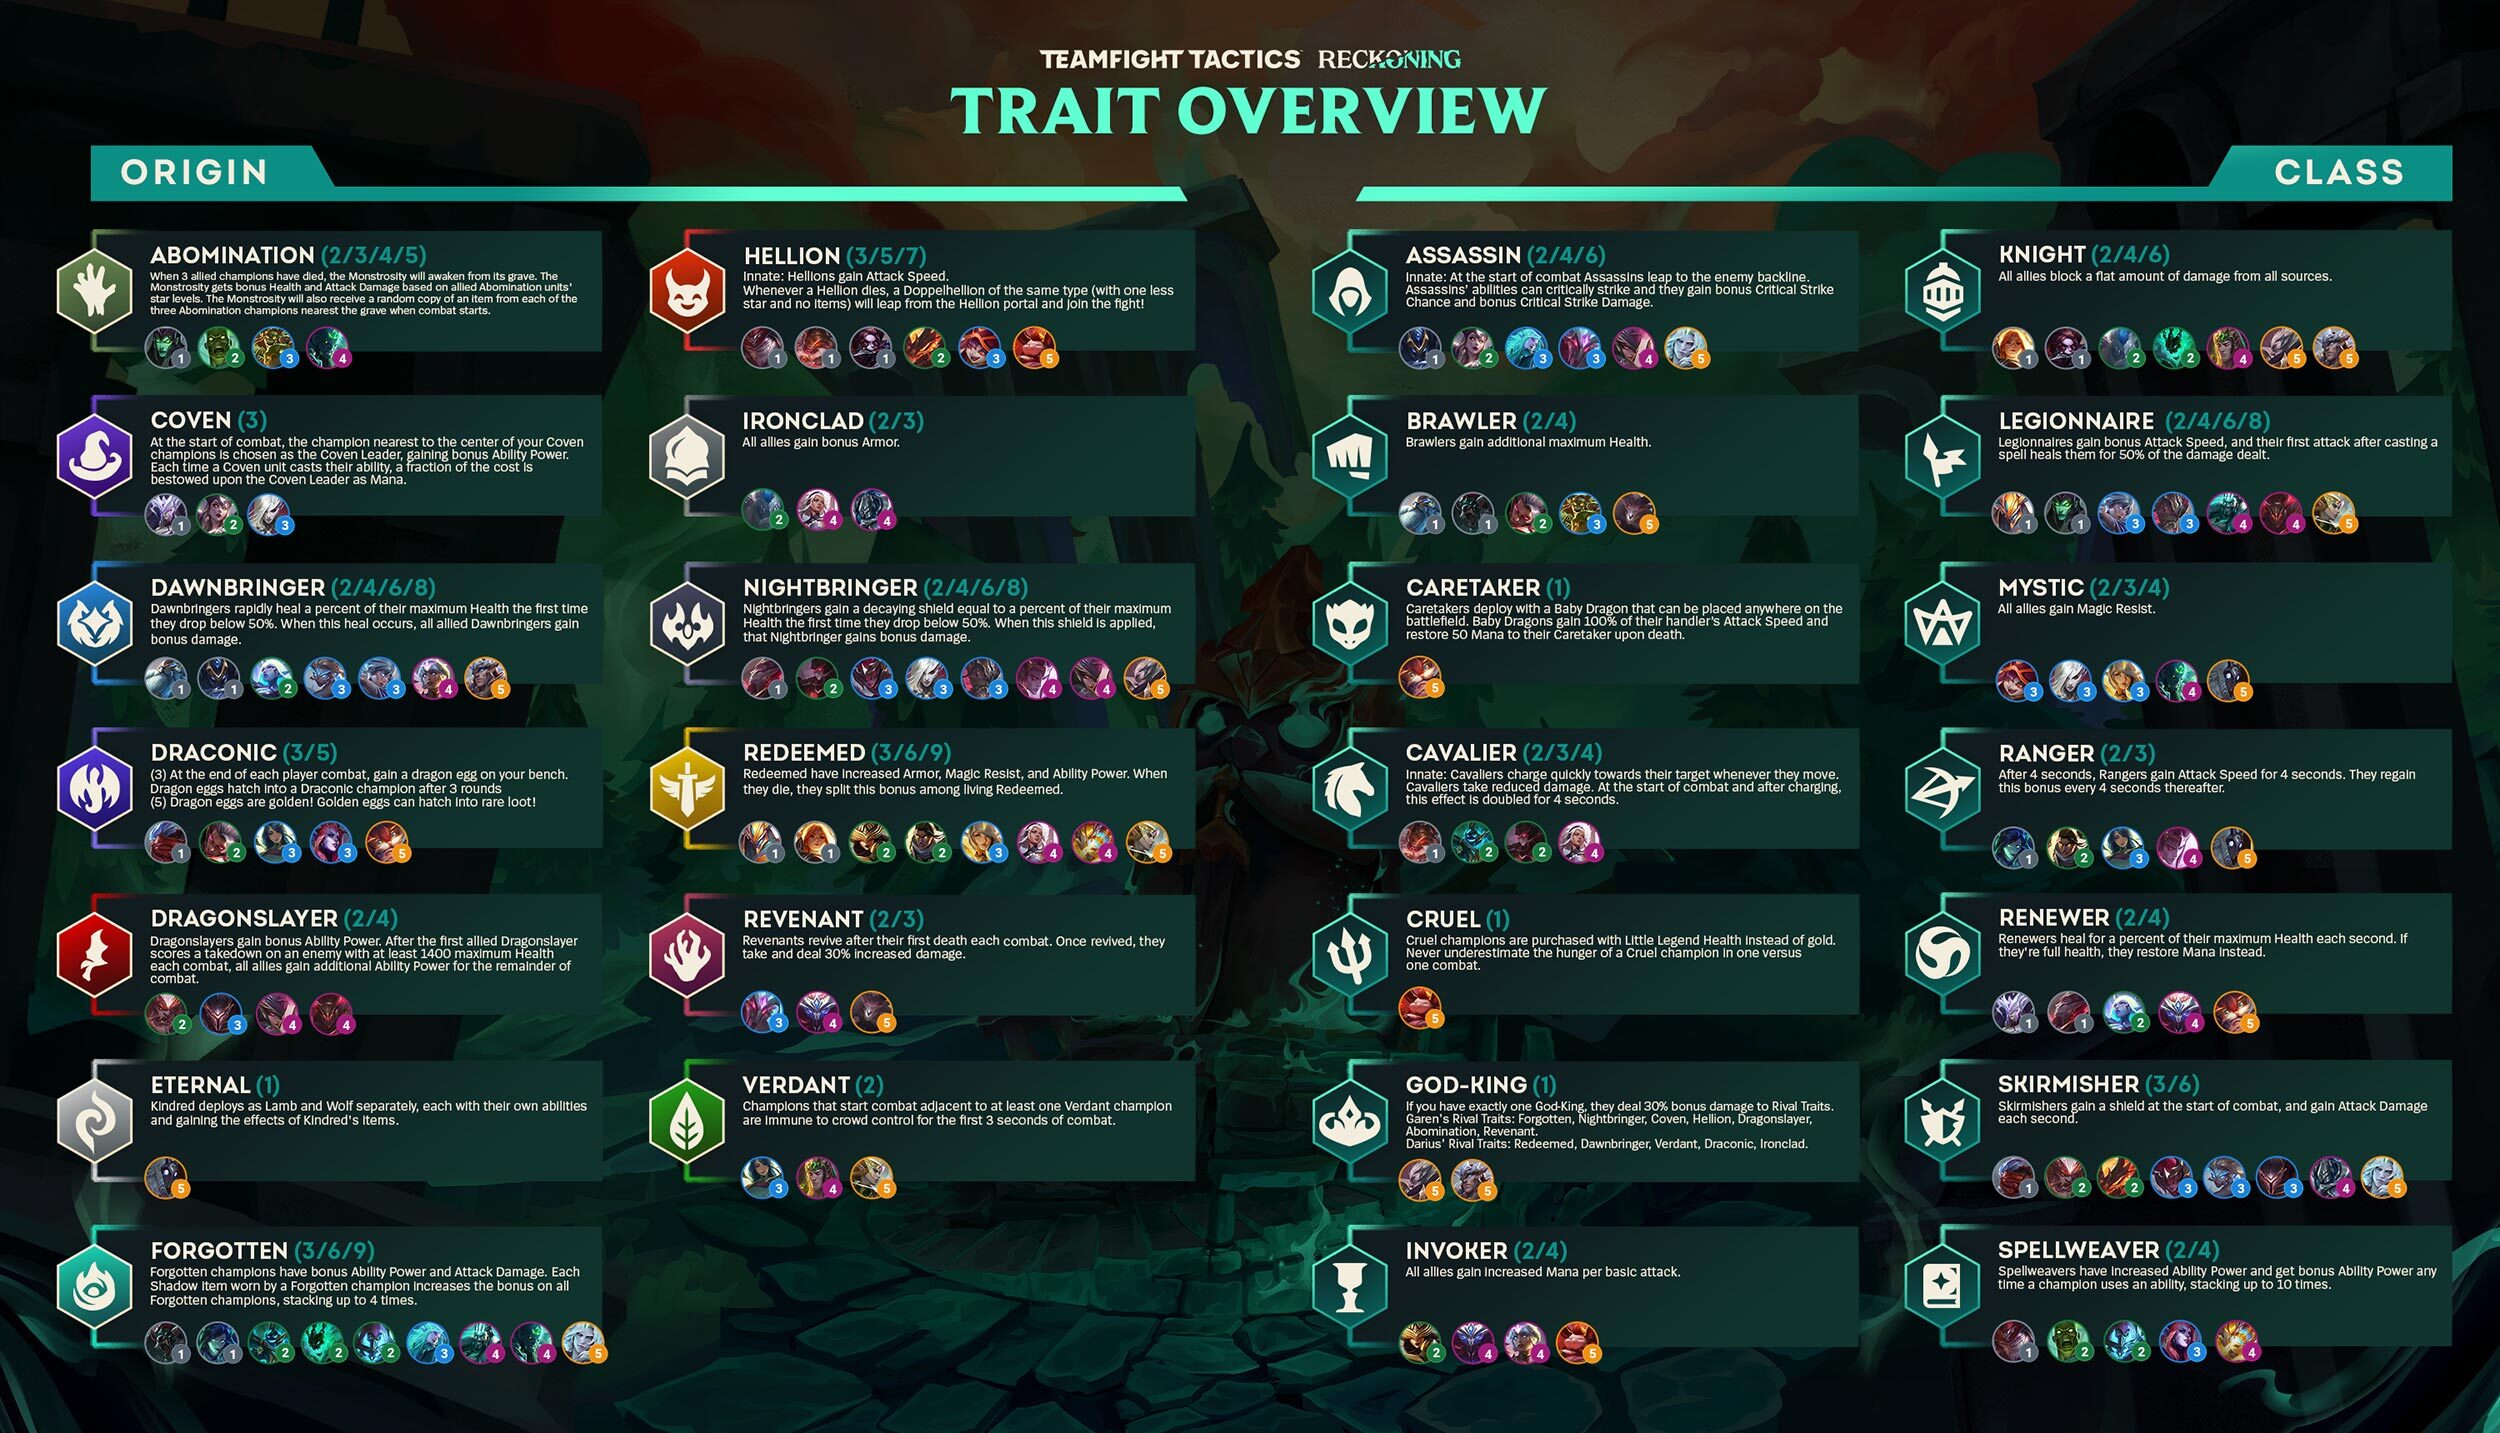 TFT Set 5 Overview! :: League of Legends (LoL) Forum on MOBAFire